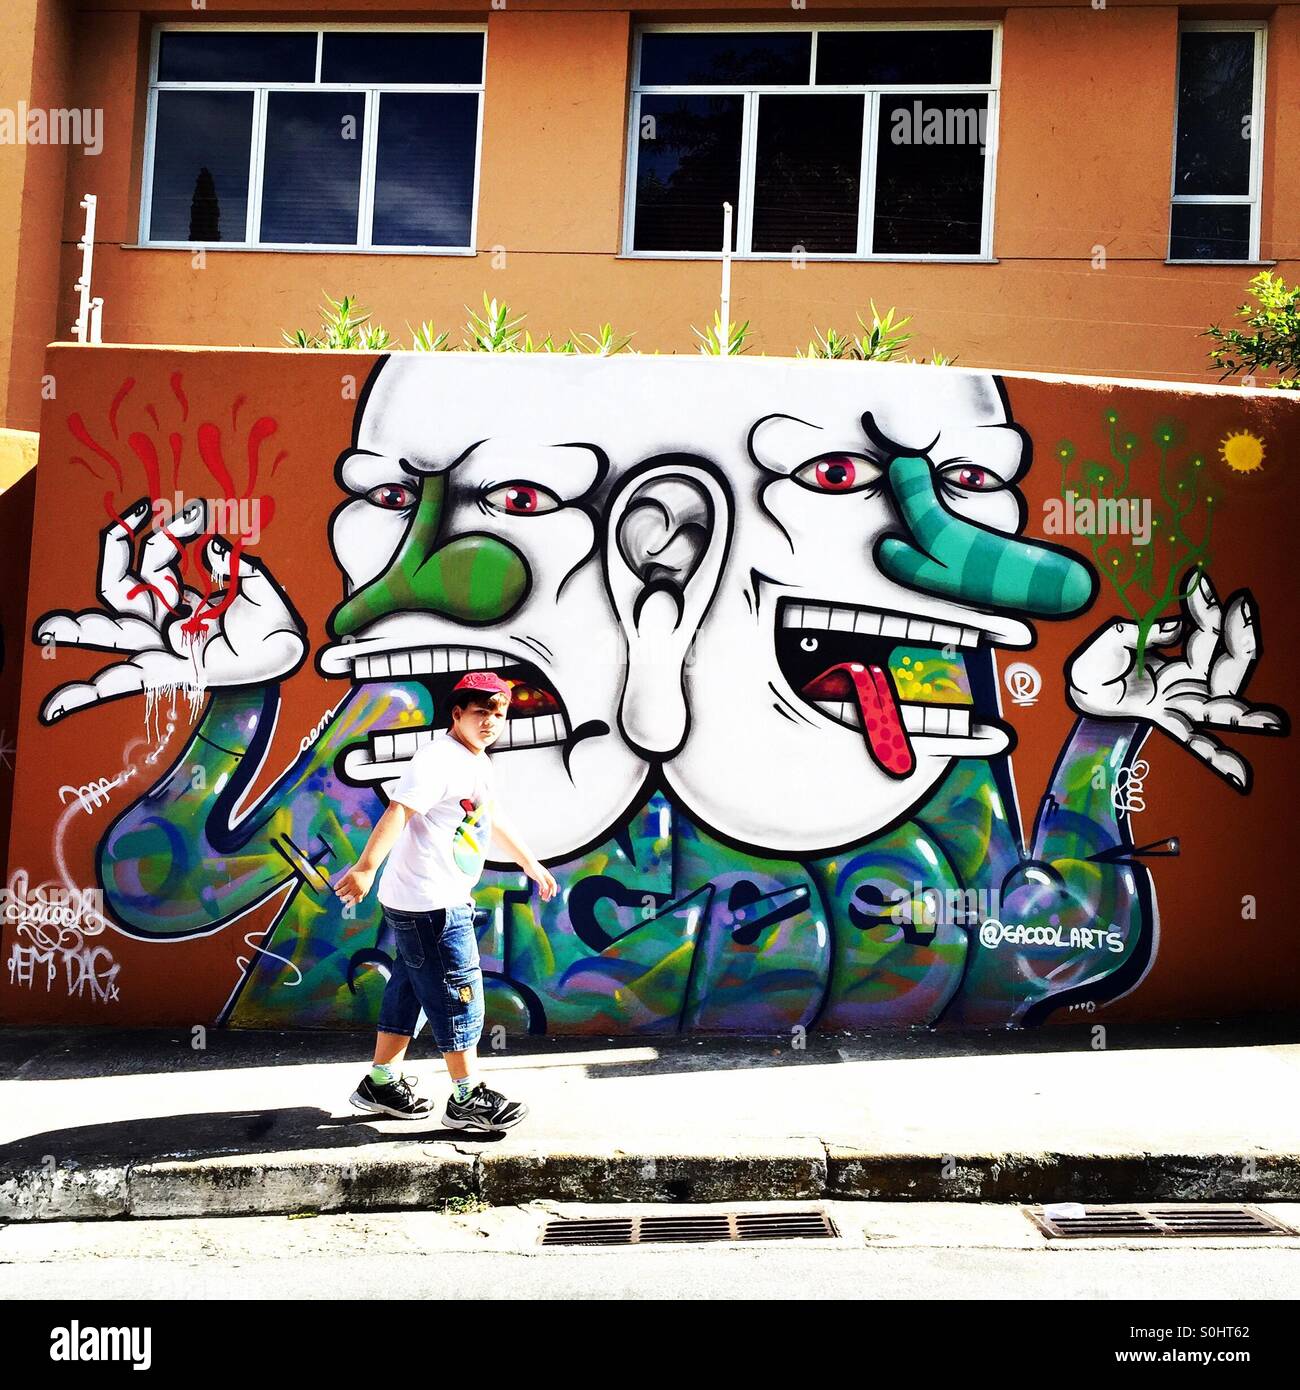 Sao Paulo - May 23: Unknown child in front of graffiti wall on the streets of Vila Madalena neighborhood on May 23, 2015 in Sao Paulo, Brazil Stock Photo